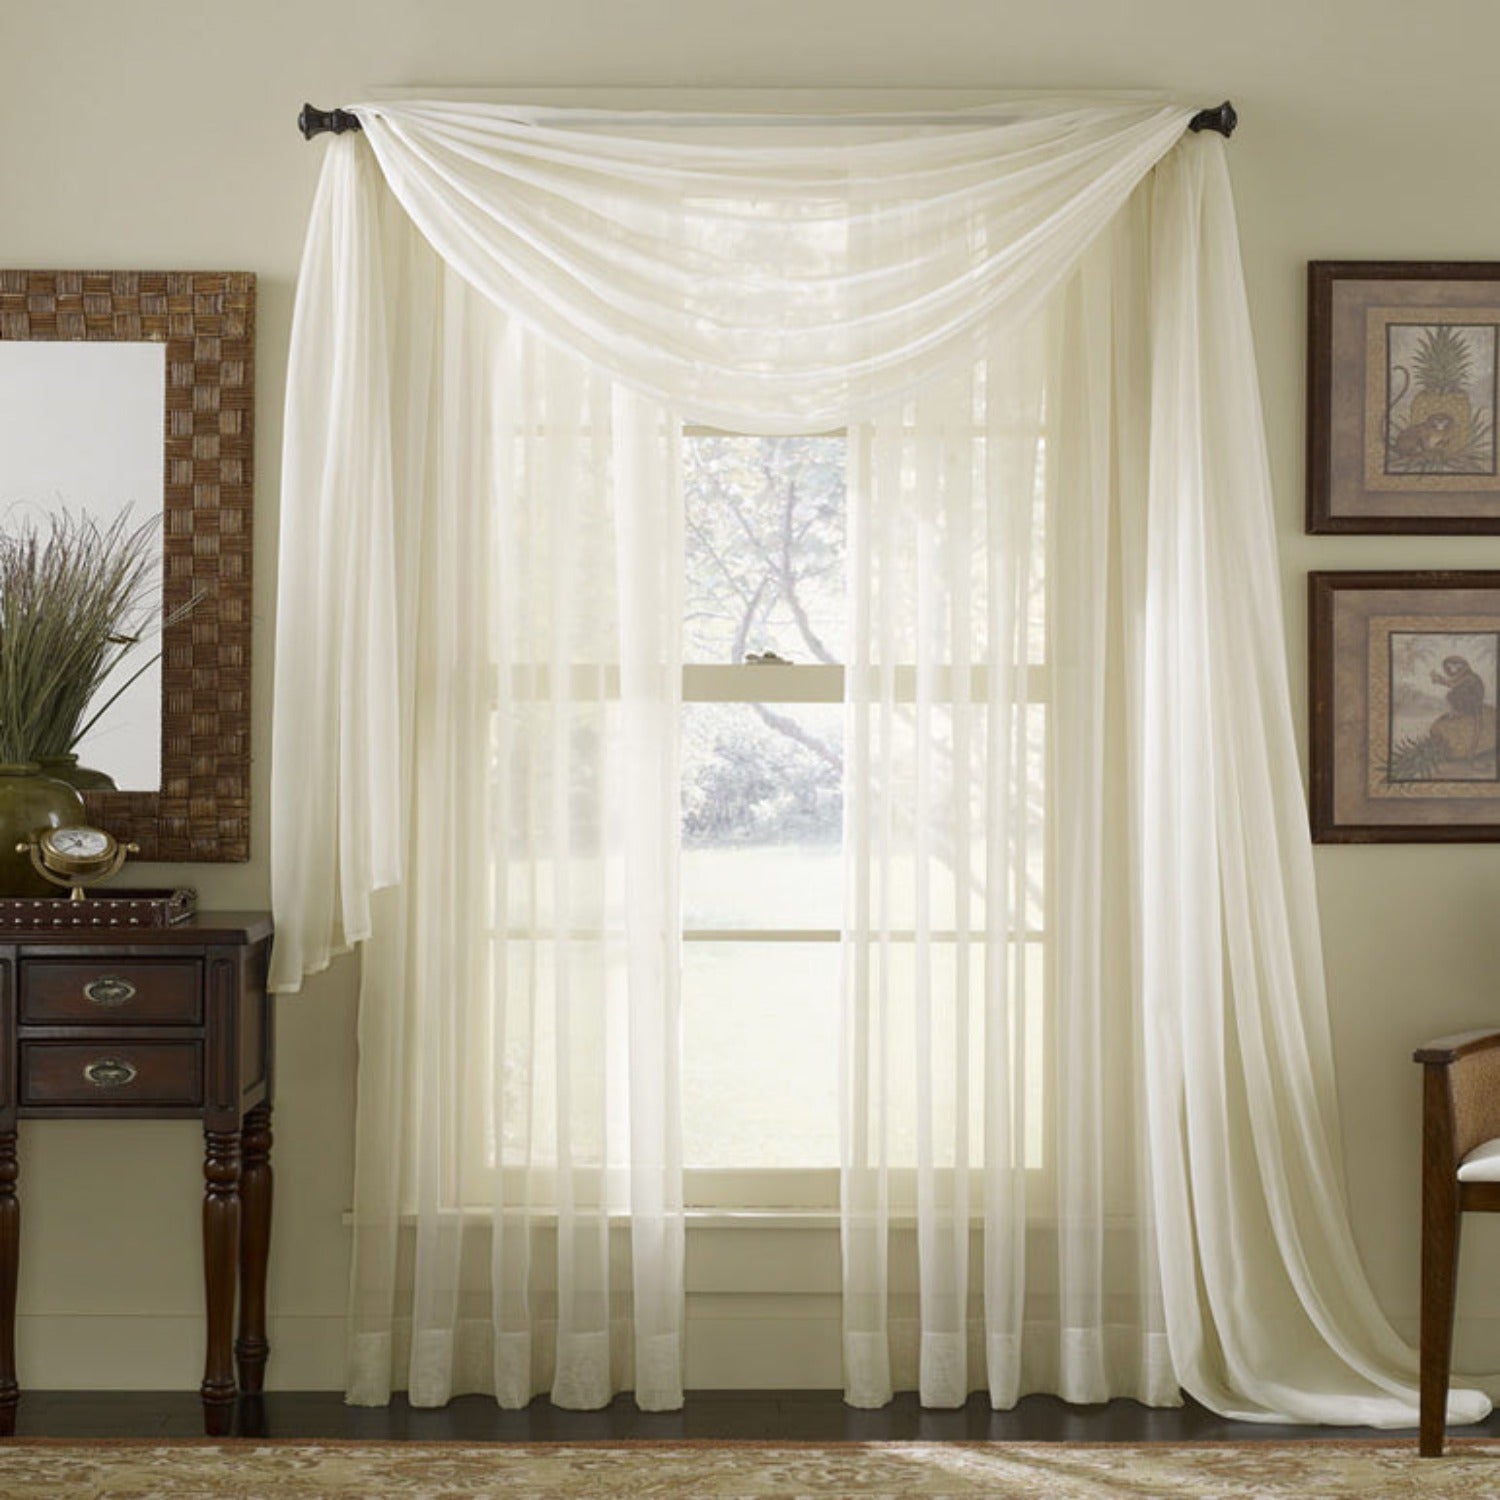 Voile Sheer Curtains and Scarf hanging on curtain rods